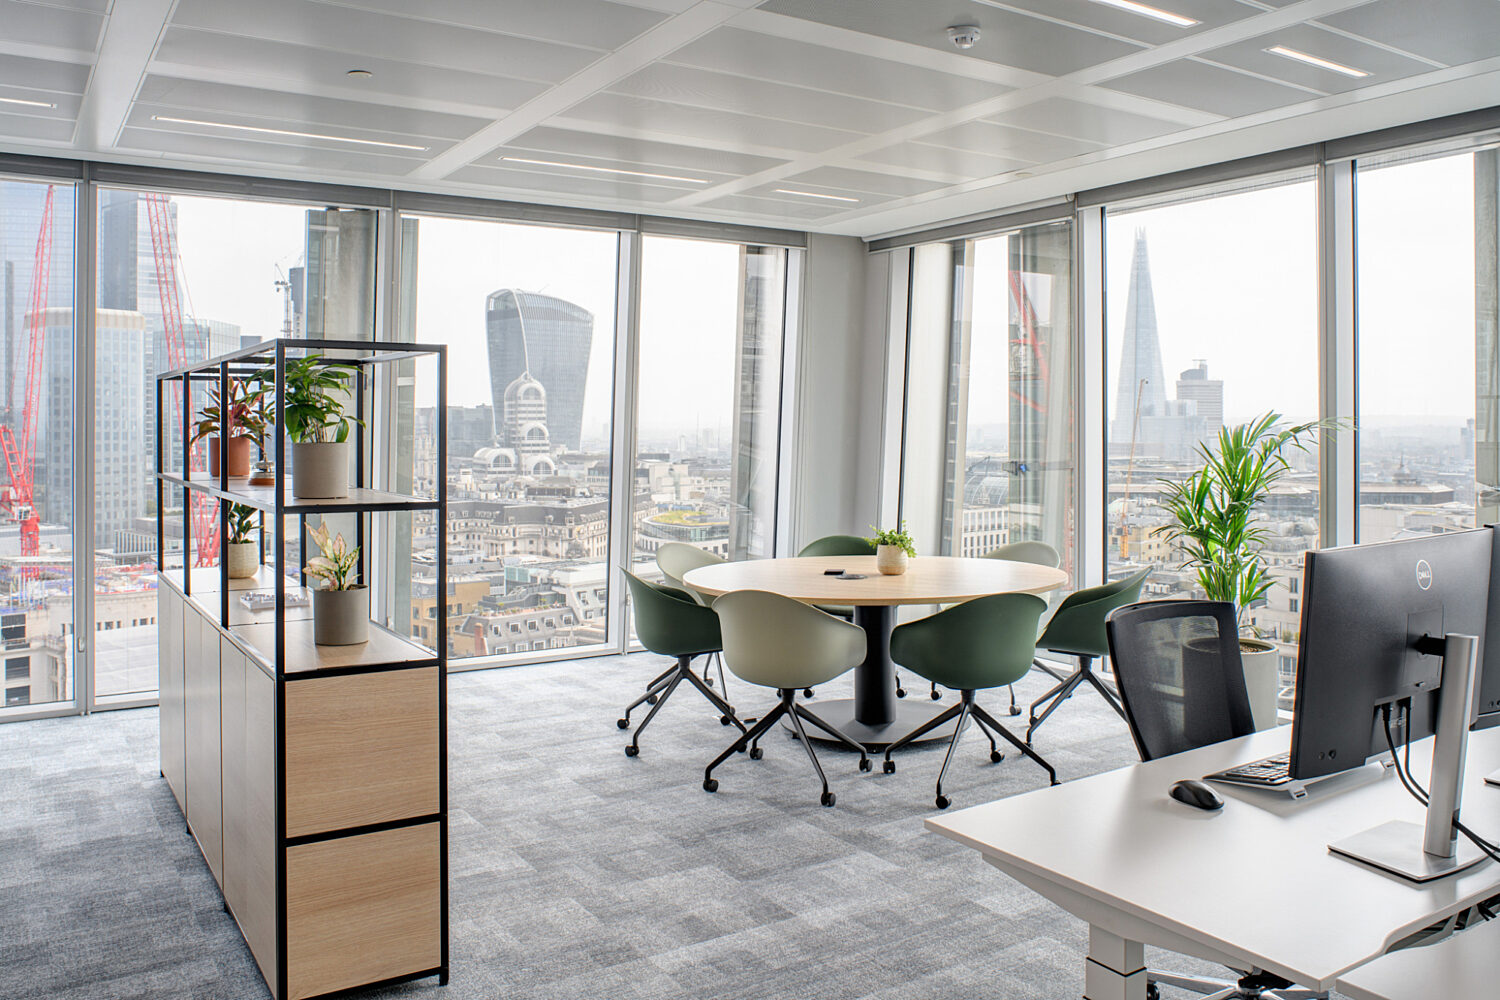 Collaborative workspace in London office